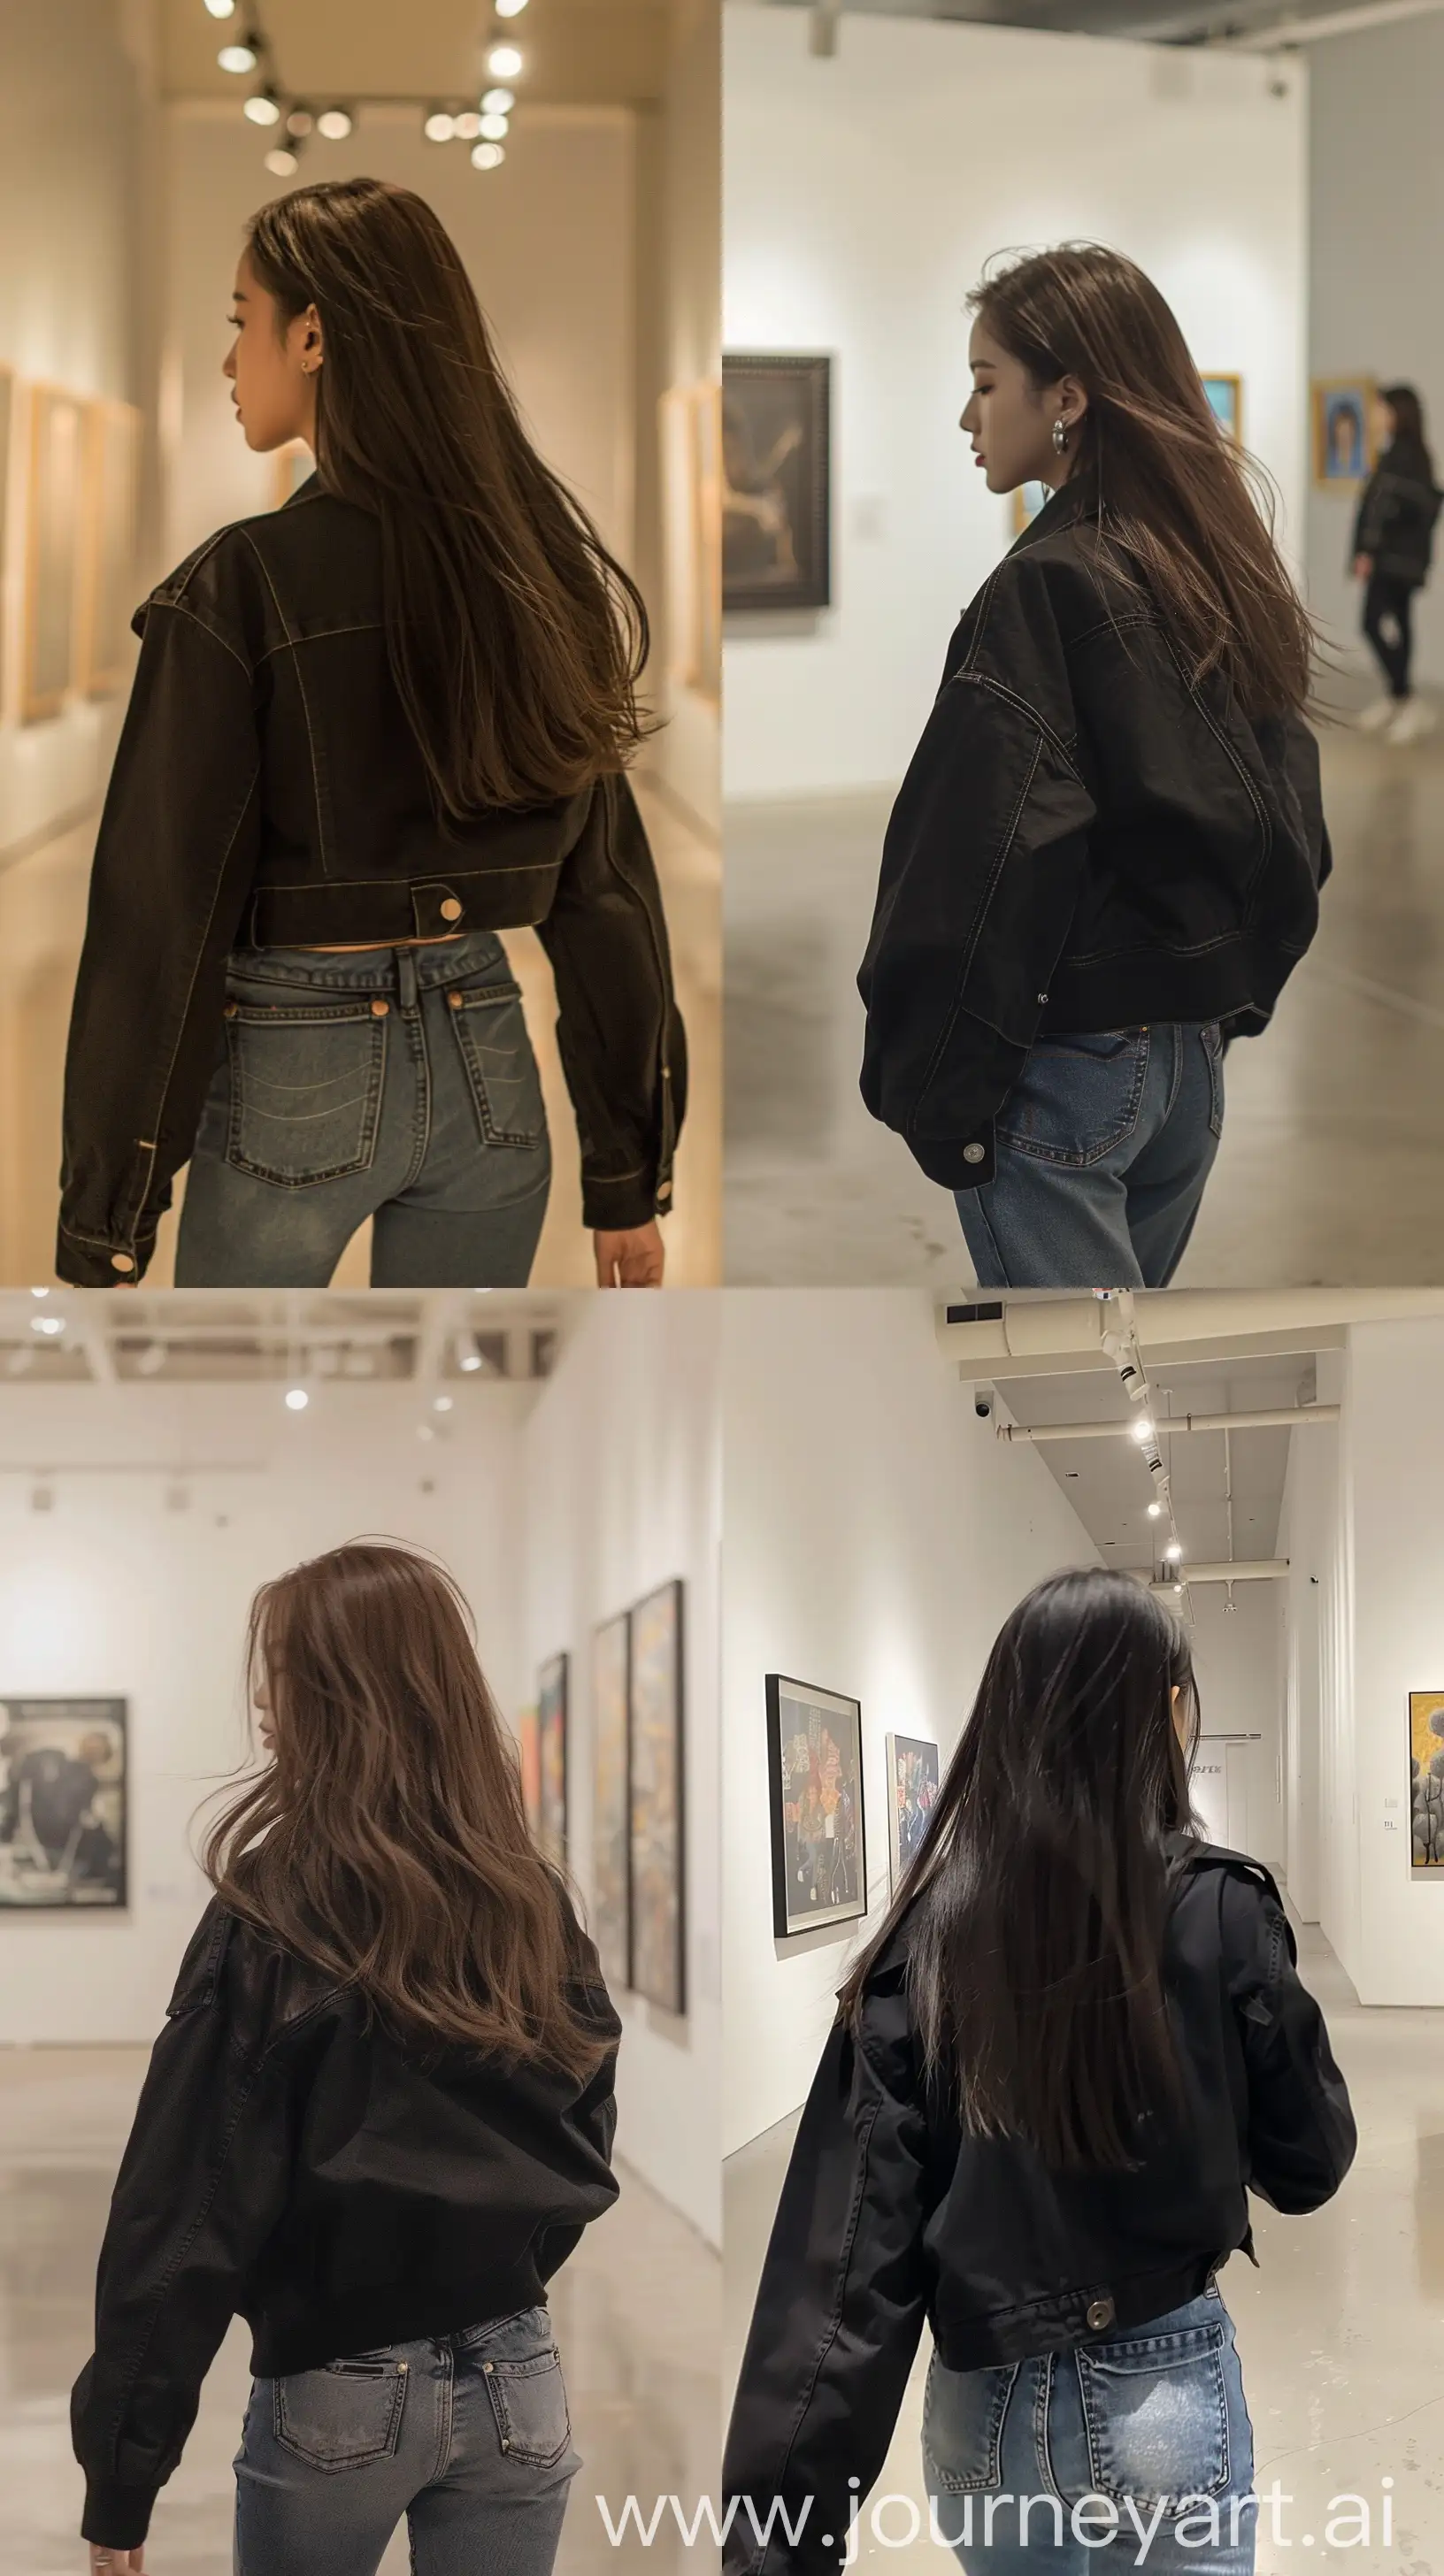 Jennie-from-BLACKPINK-Strolling-Through-Art-Gallery-in-Stylish-Black-Jacket-and-Jeans